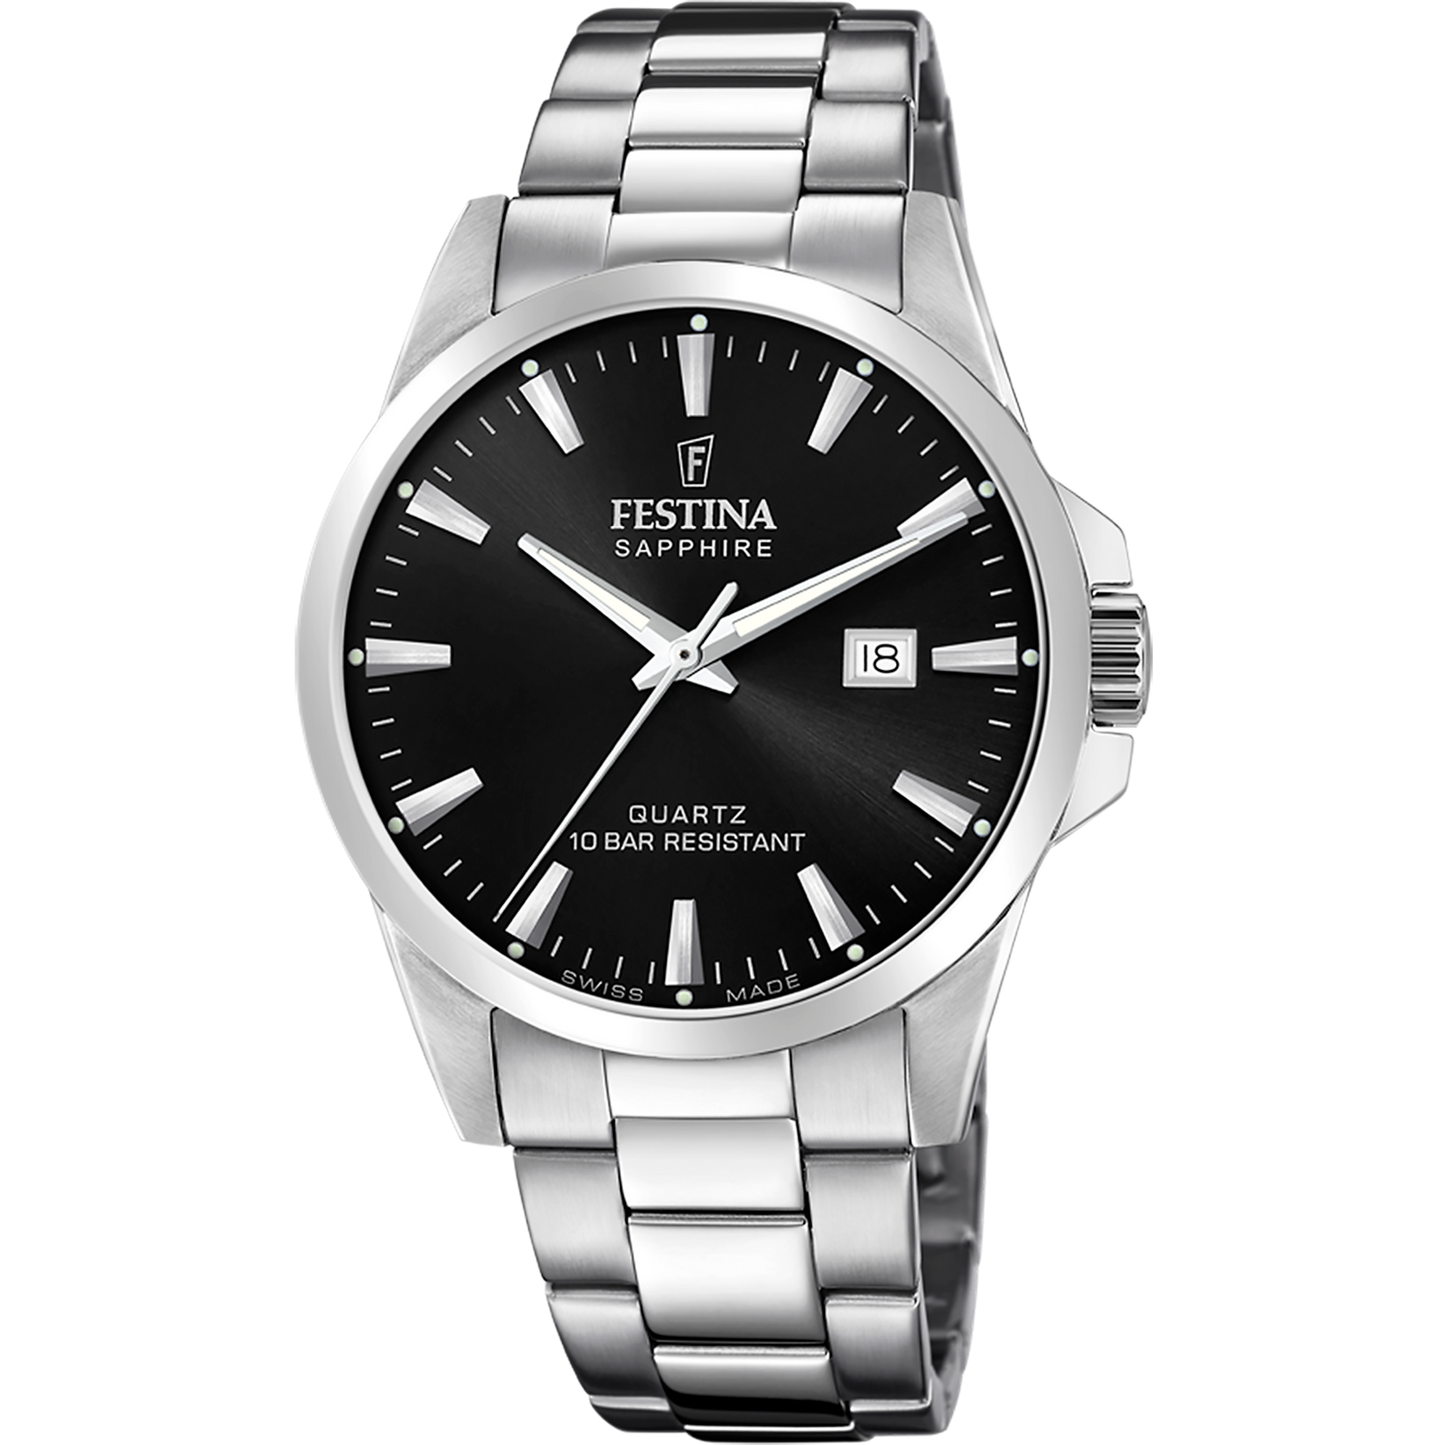 Festina Swiss Made F20024-4 - Analog - Strap Material Stainless Steel I Festina Watches USA